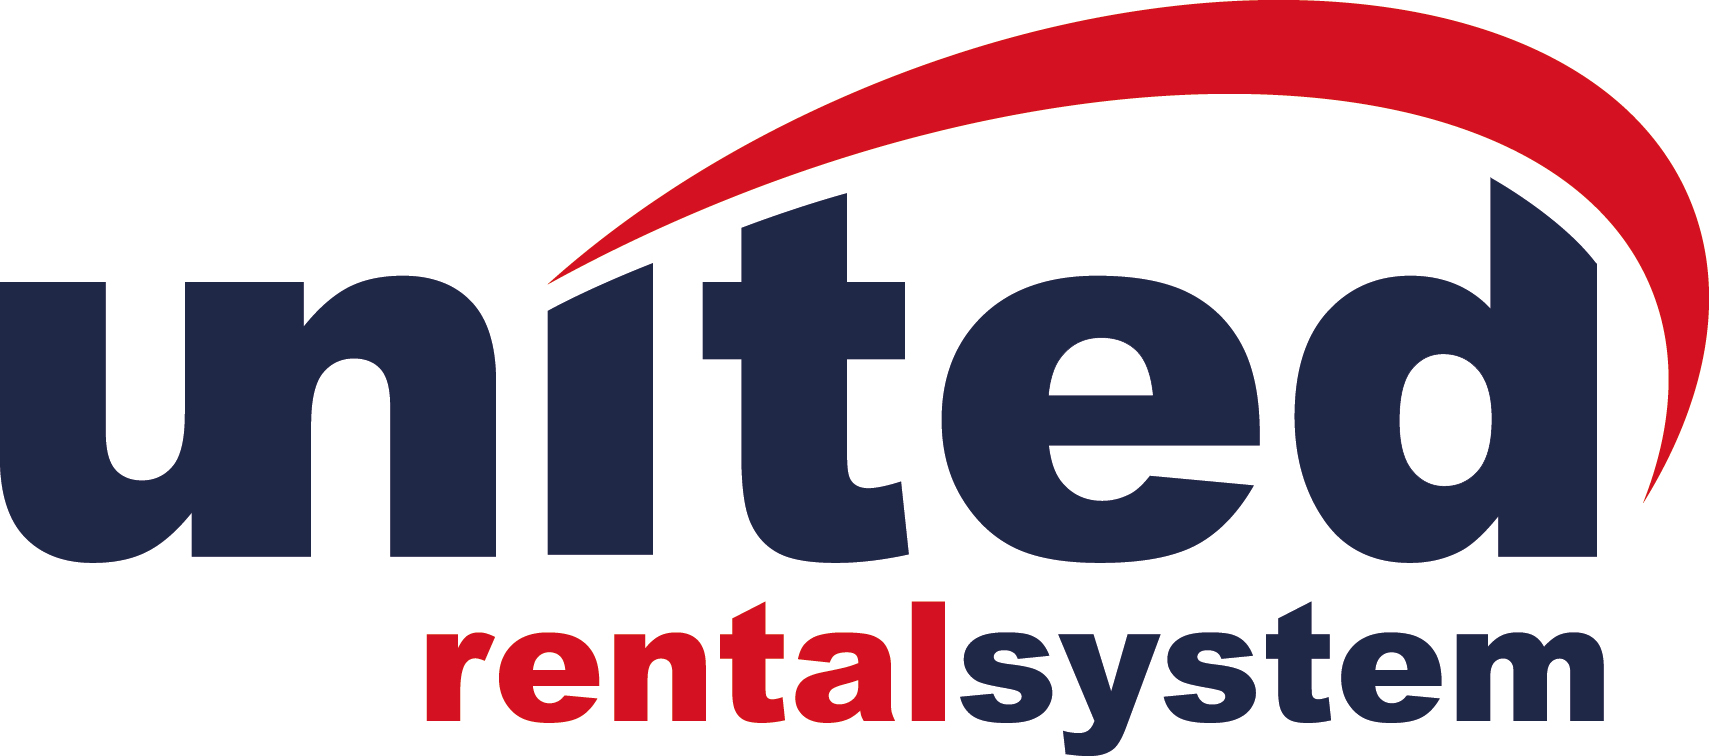 United Rental Systems